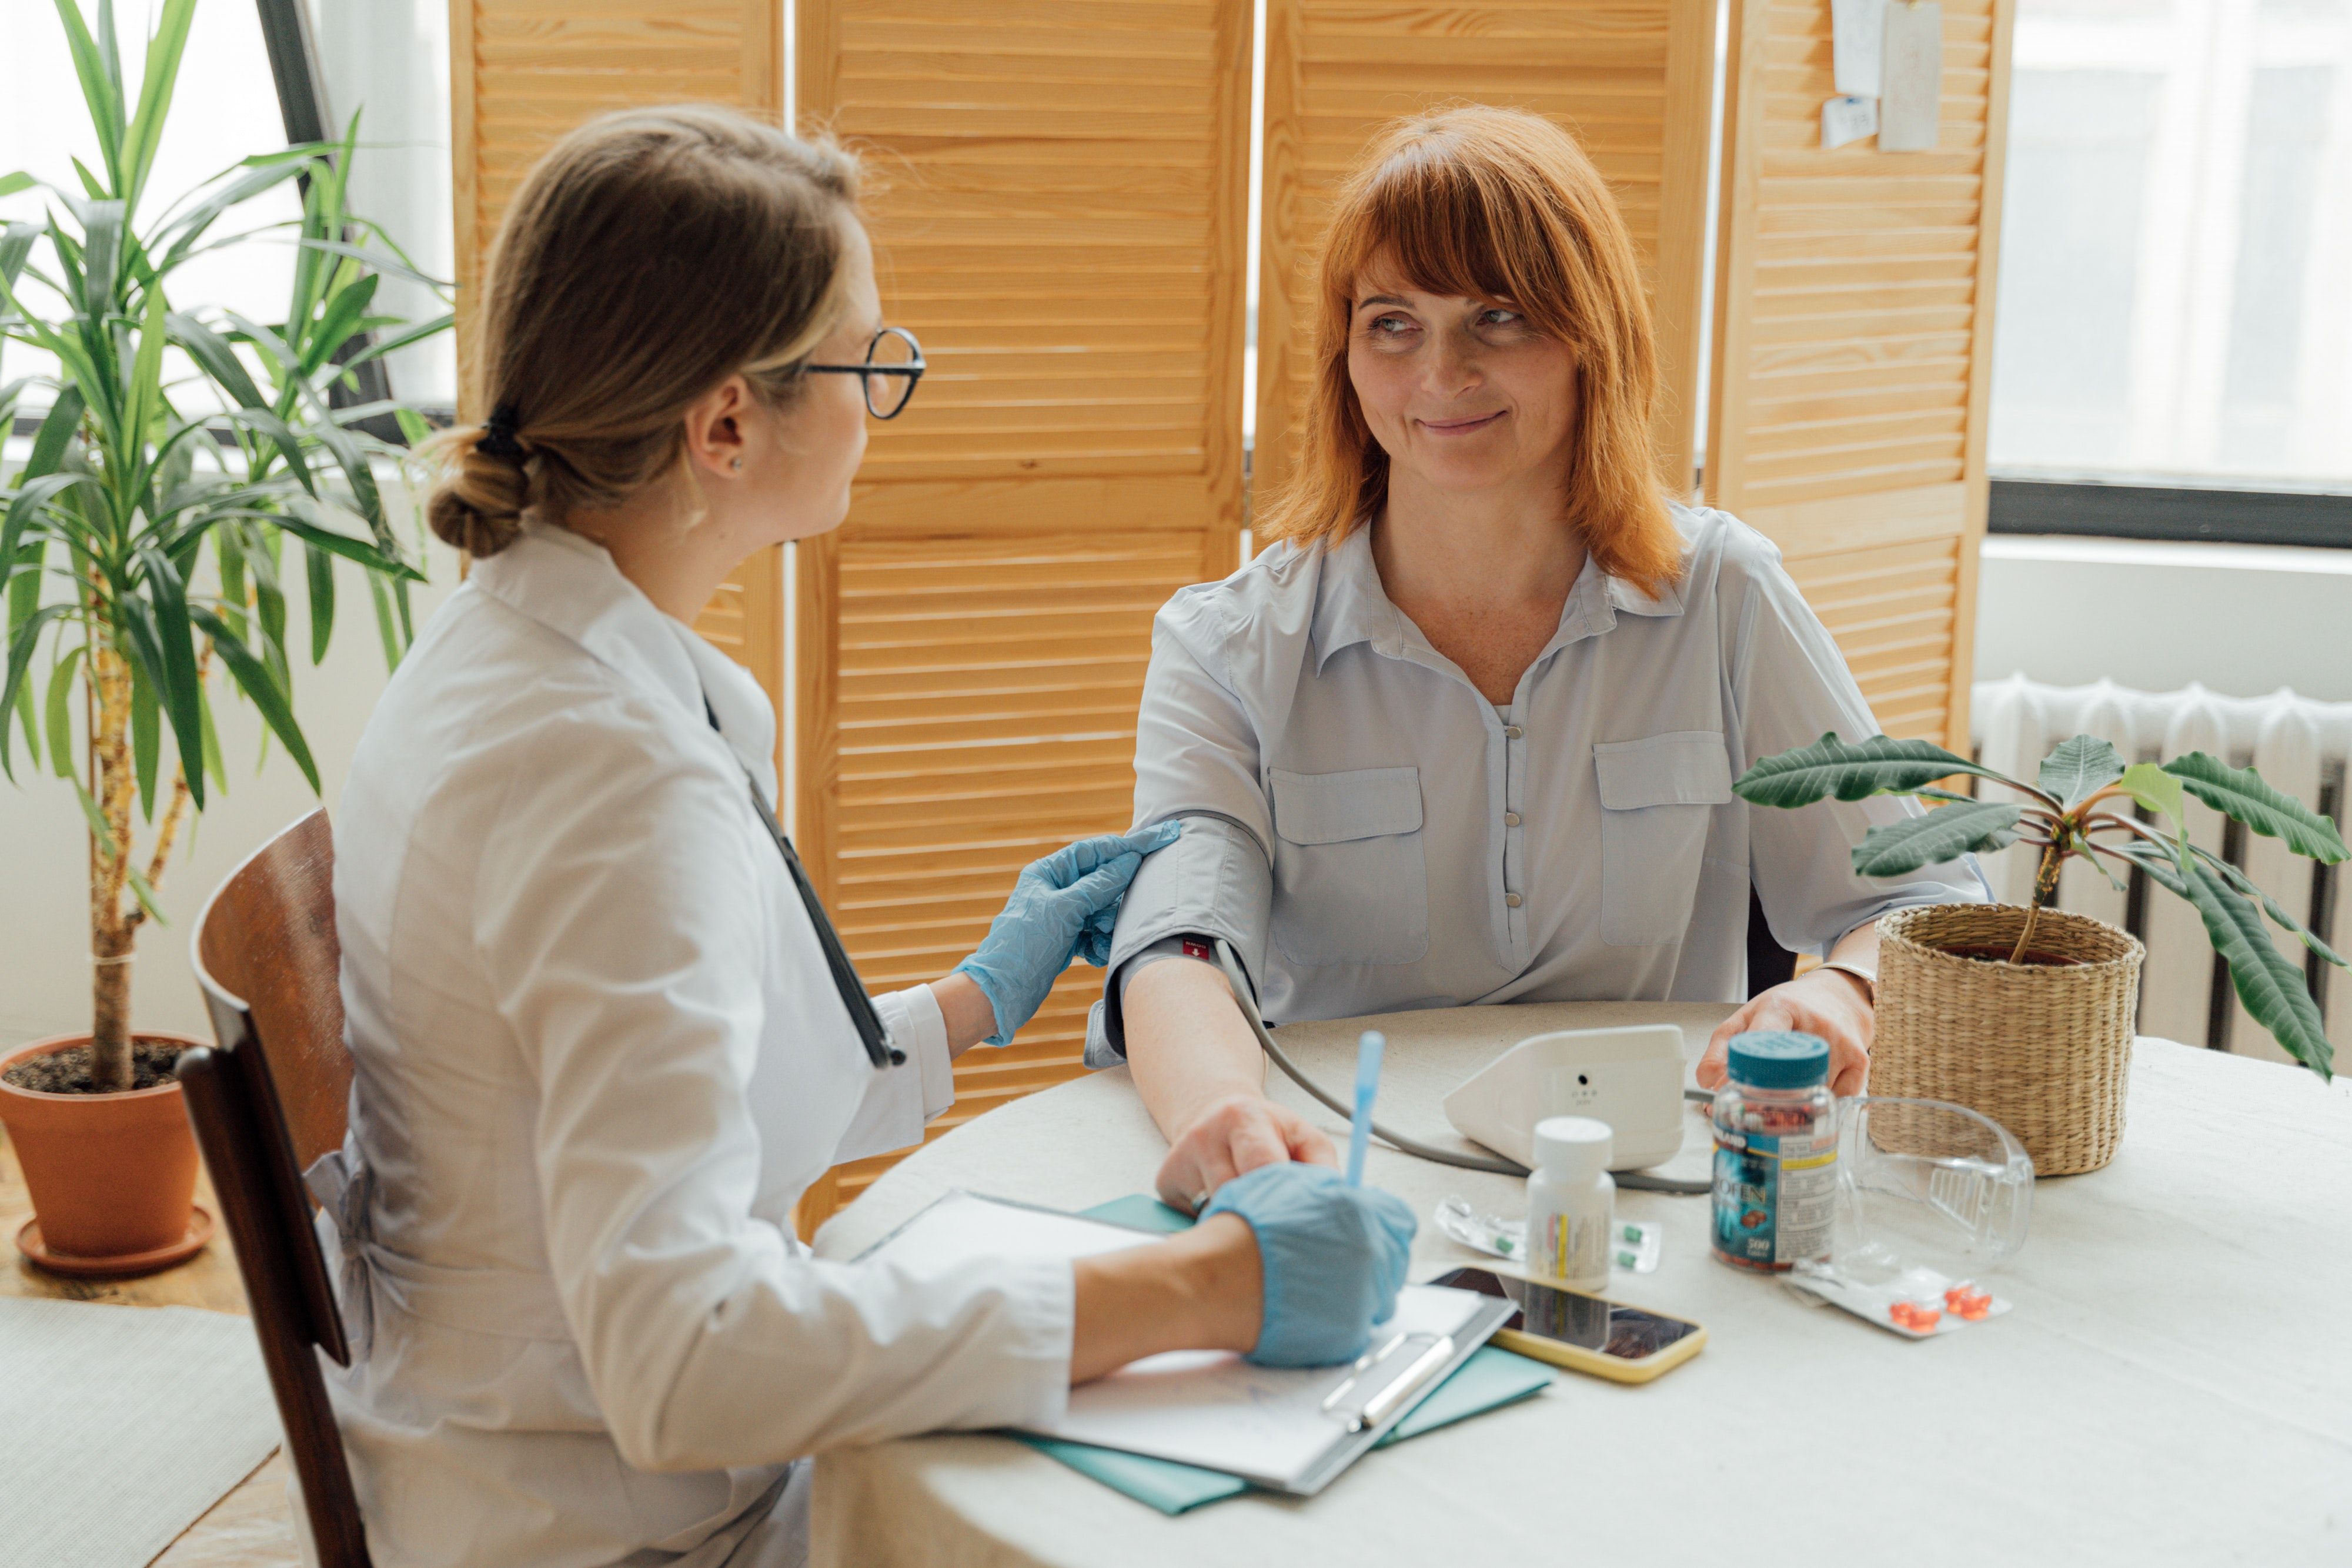 Photo by Antoni Shkraba: https://www.pexels.com/photo/a-doctor-checking-a-patient-s-blood-pressure-5215000/